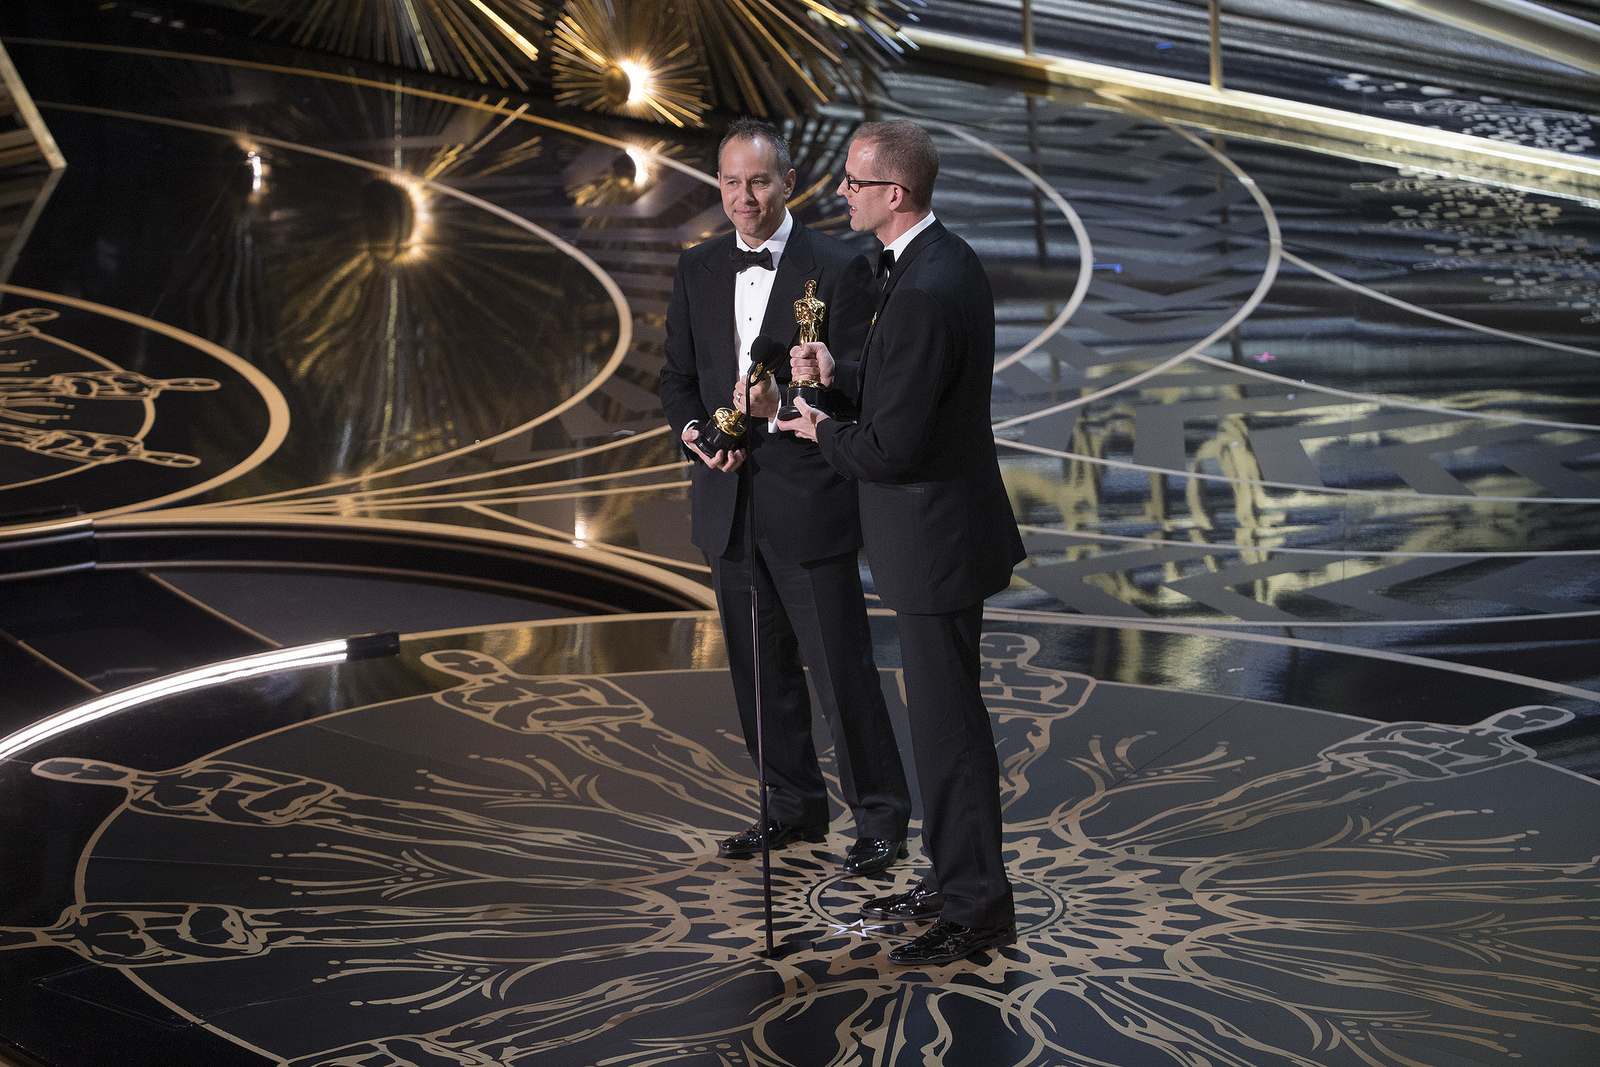 oscars 20166 The 88th Academy Awards Results